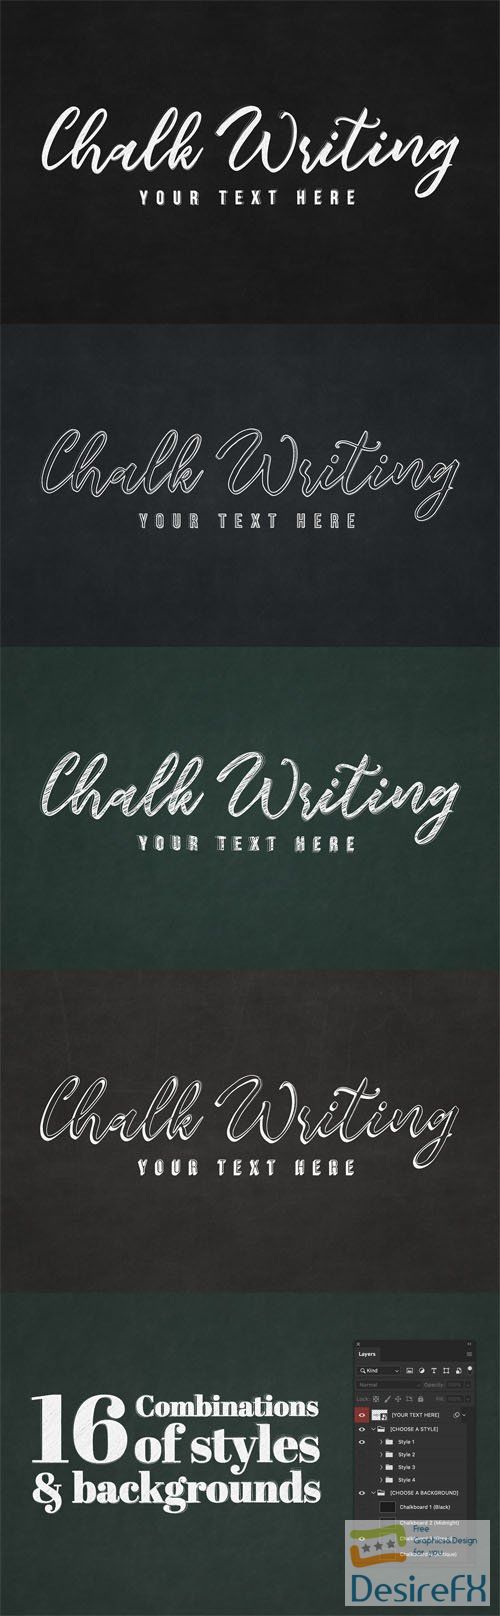 Chalk Writing - 4 Photoshop Text Effects